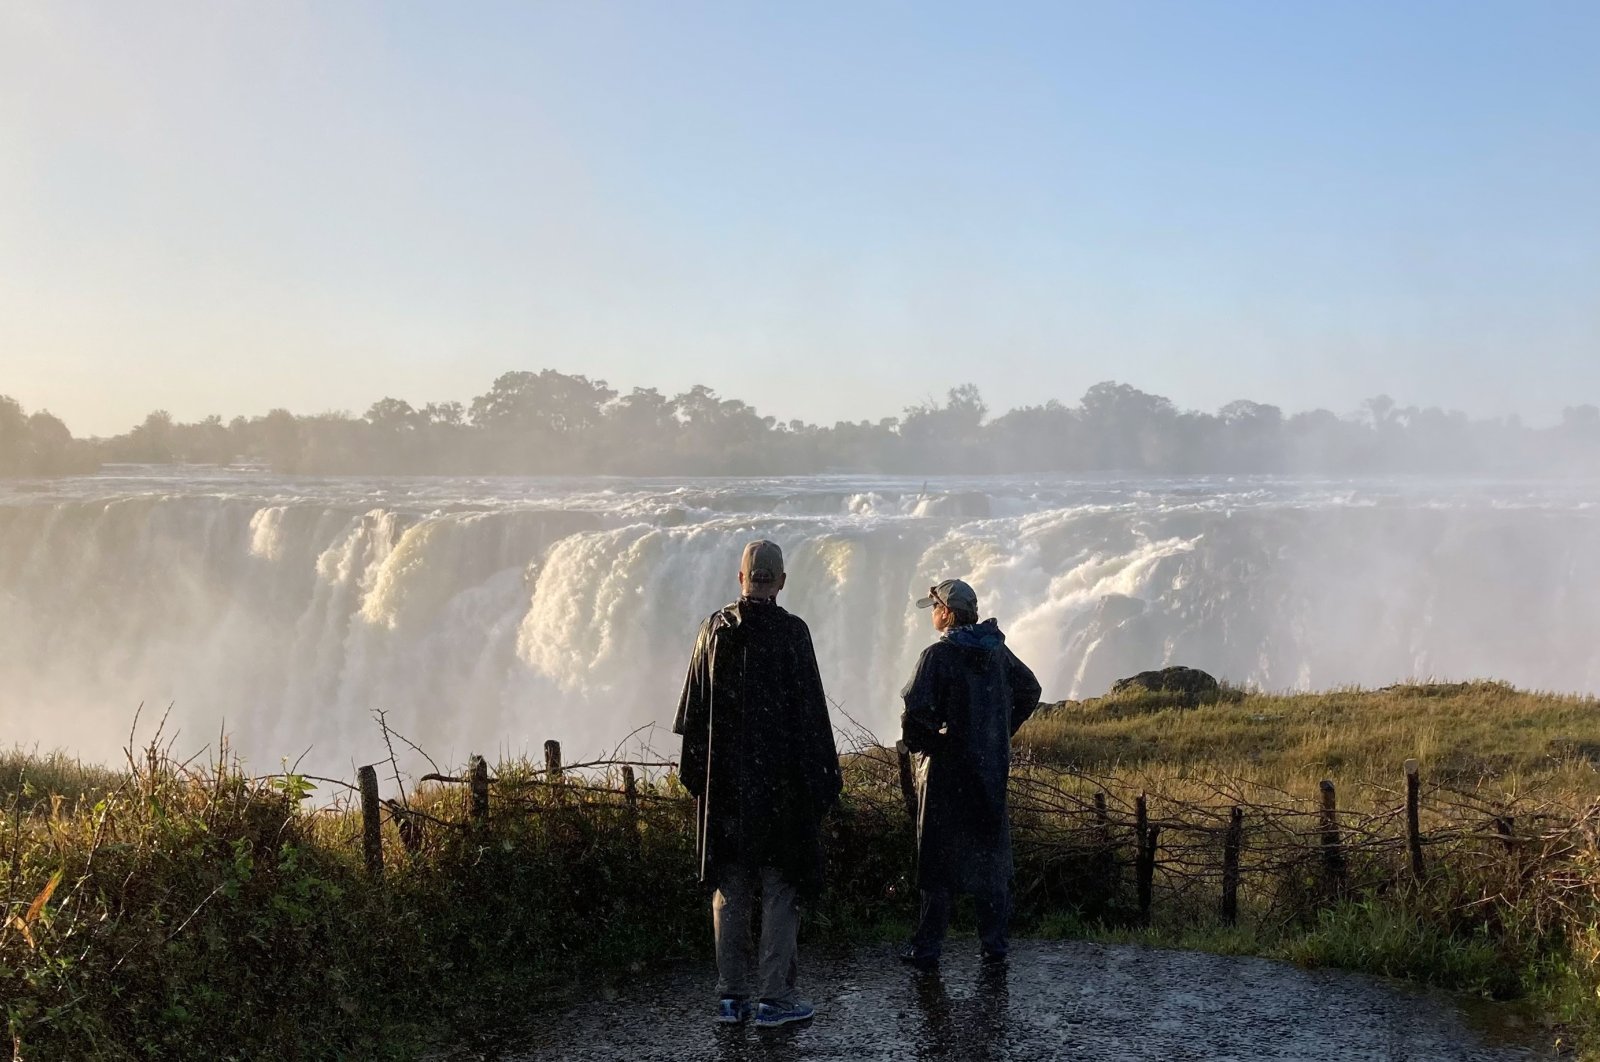 It is best to put on a raincoat when standing close to the falls, Victoria Falls, Zimbabwe, July 6, 2022. (dpa Photo)